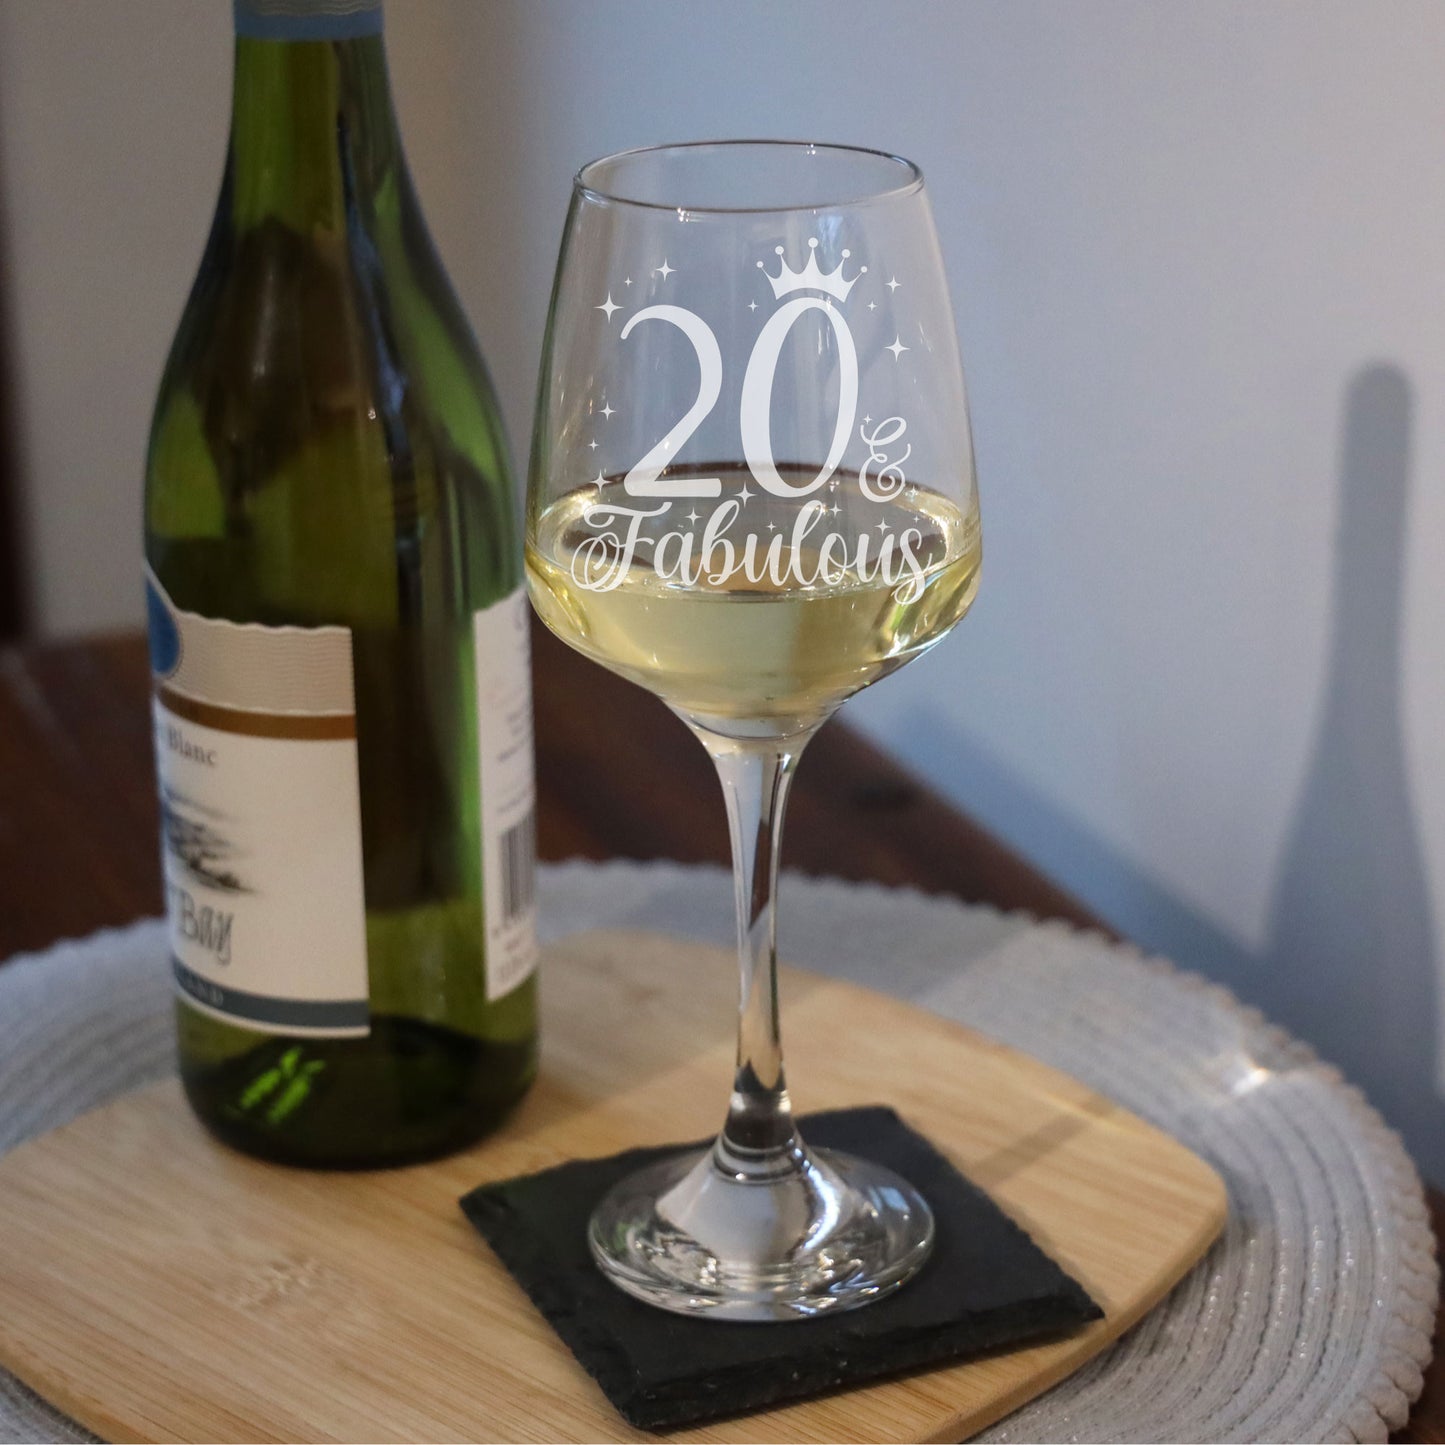 20 & Fabulous 20th Birthday Gift Engraved Wine Glass and/or Coaster Set  - Always Looking Good - Wine Glass Only  